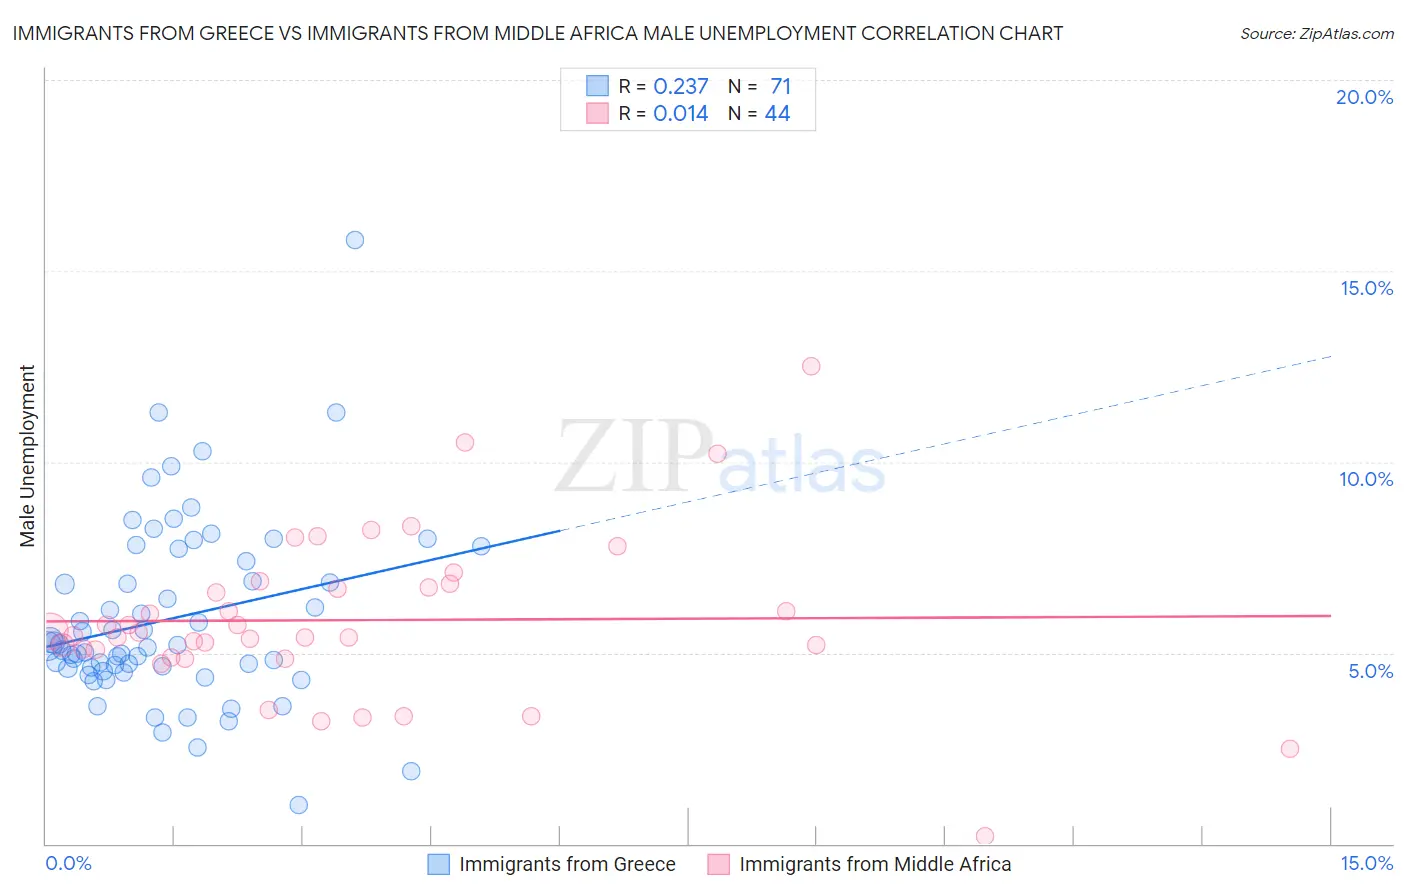 Immigrants from Greece vs Immigrants from Middle Africa Male Unemployment